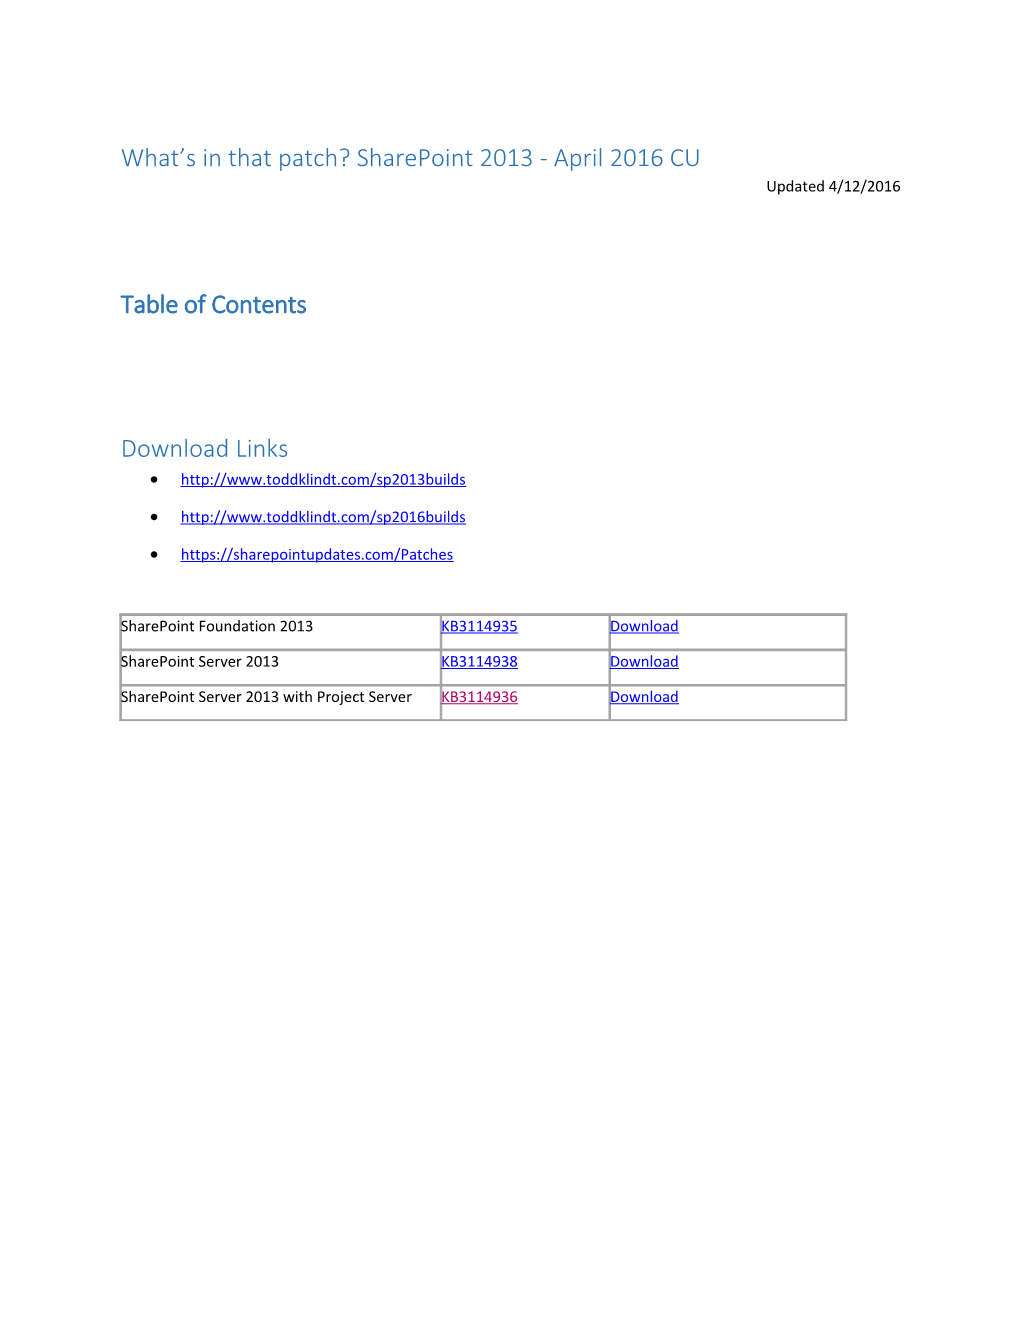 What S in That Patch?Sharepoint2013 - April 2016 CU